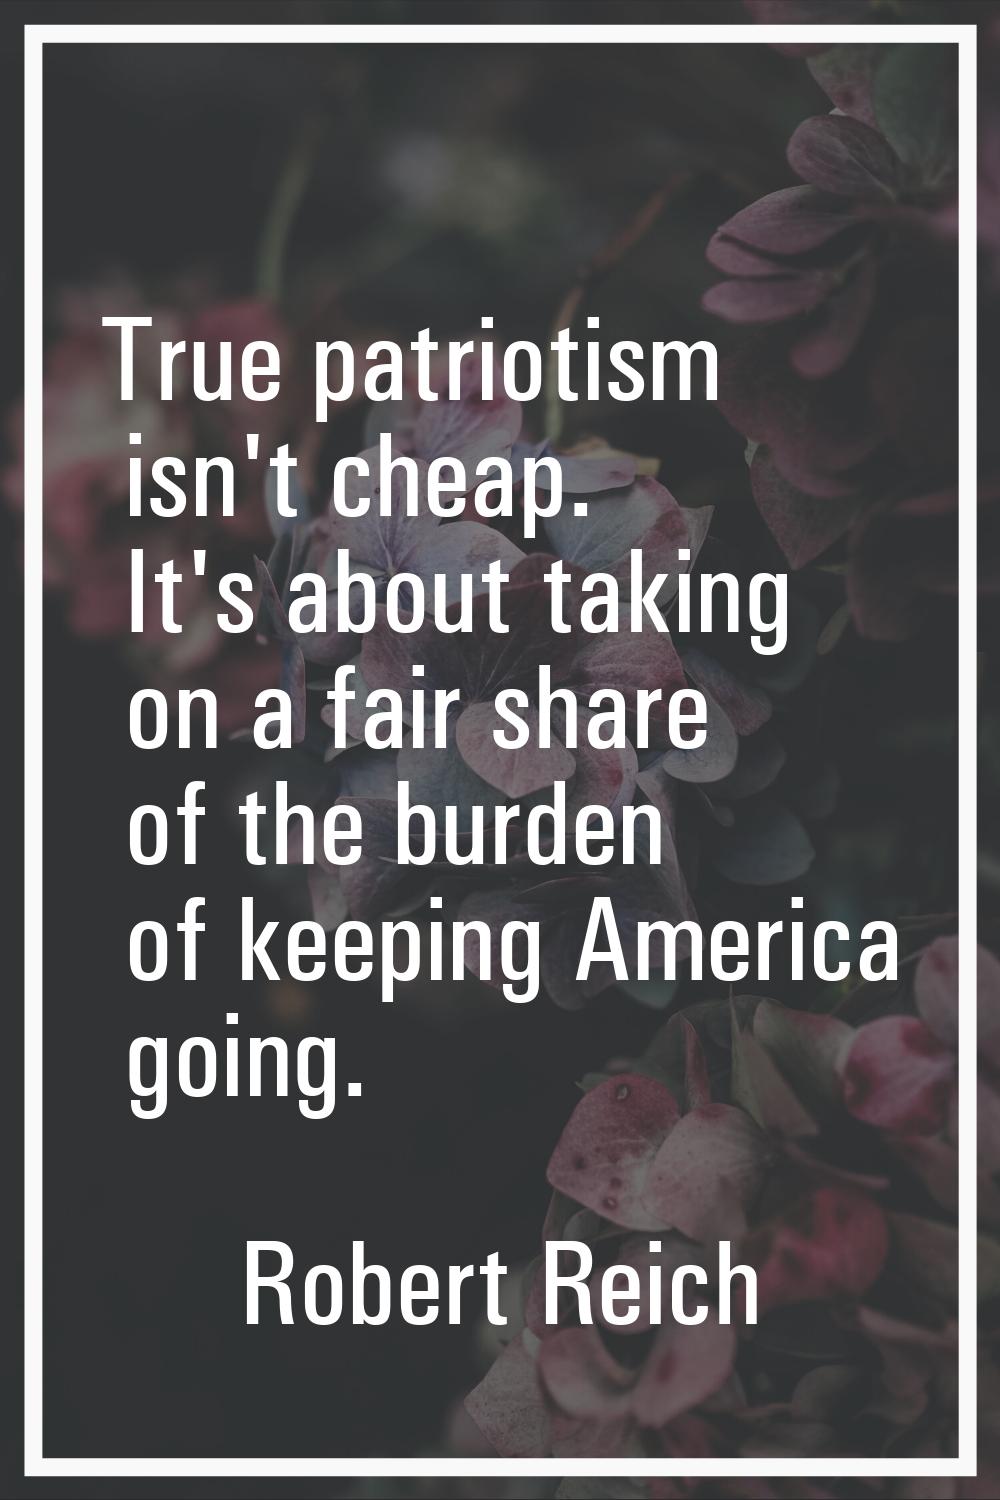 True patriotism isn't cheap. It's about taking on a fair share of the burden of keeping America goi